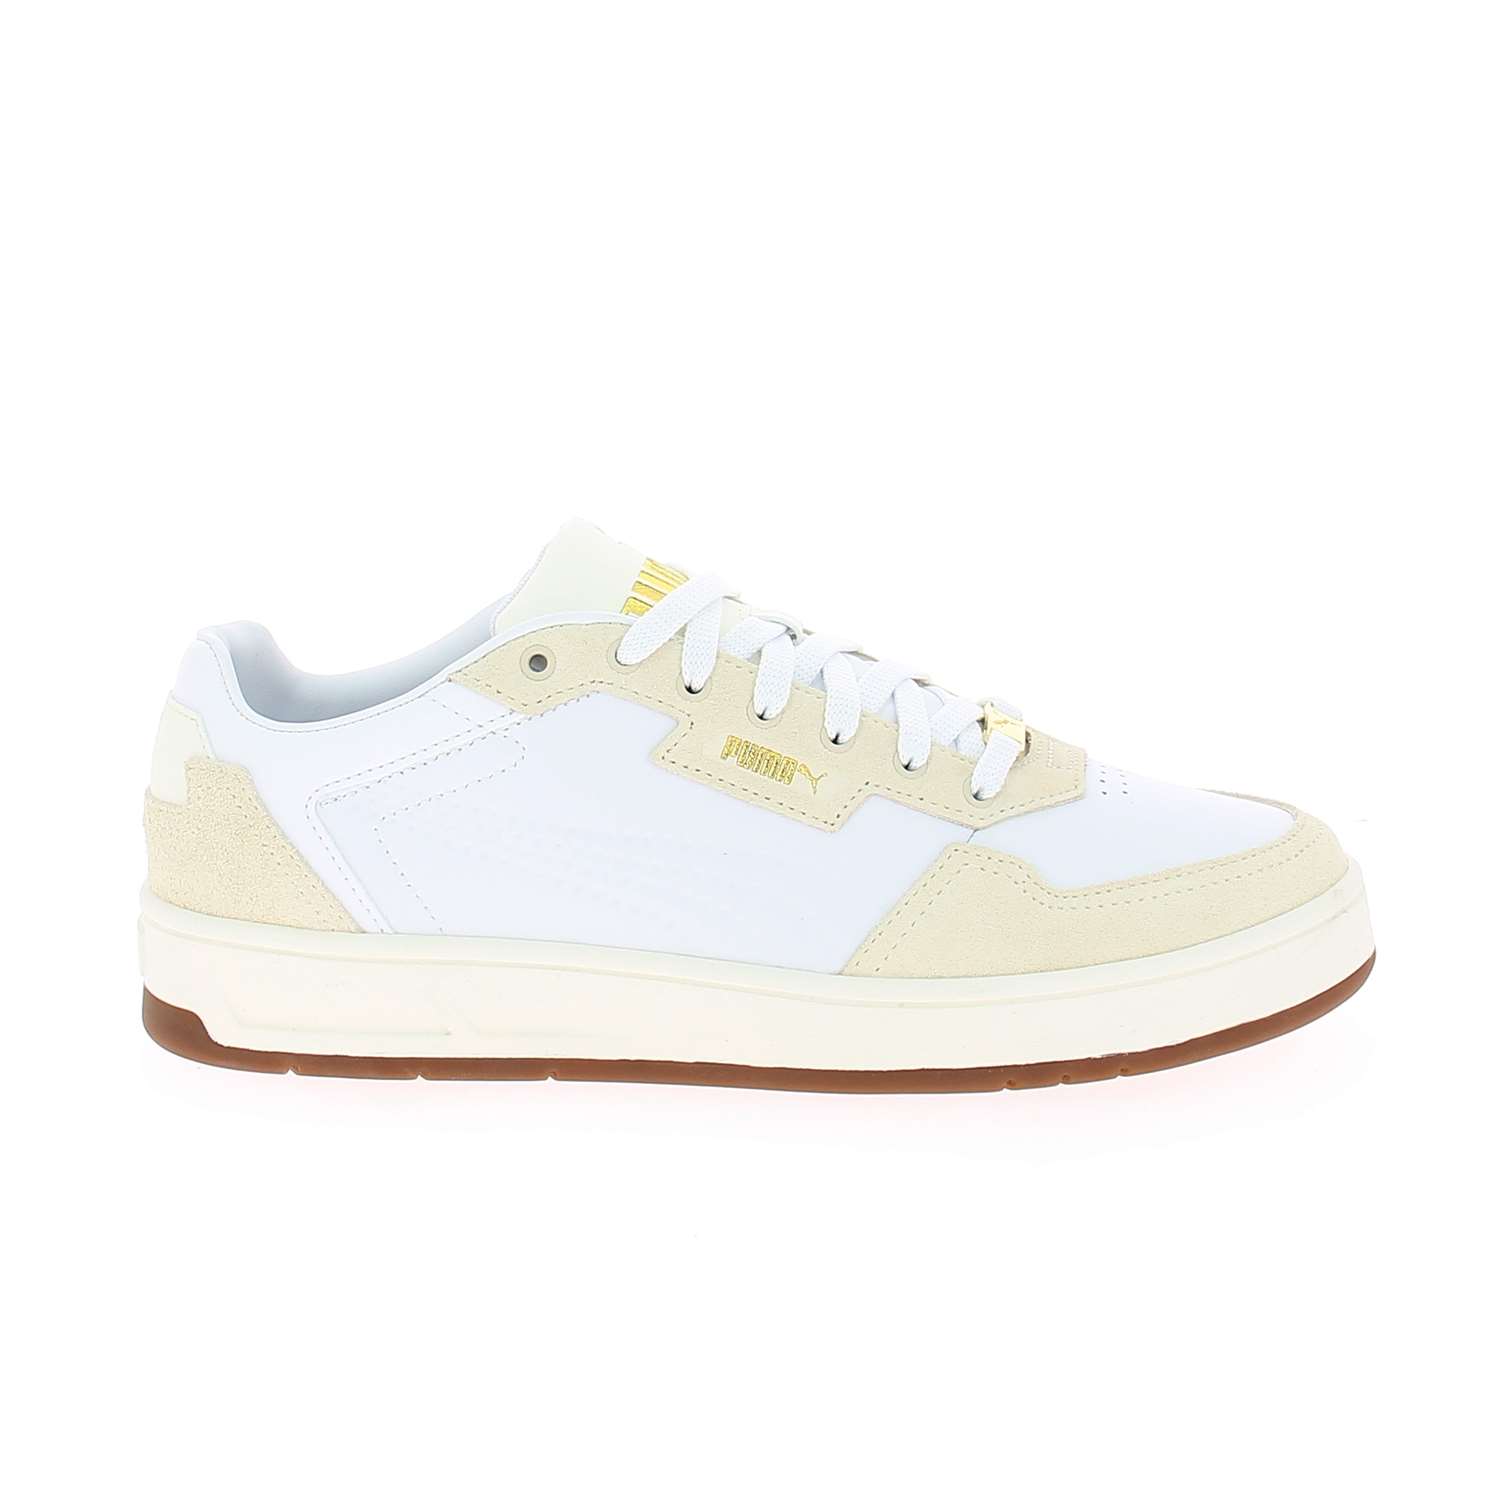 02 - CLASSIC COURT LUXE - PUMA -  - Synthétique